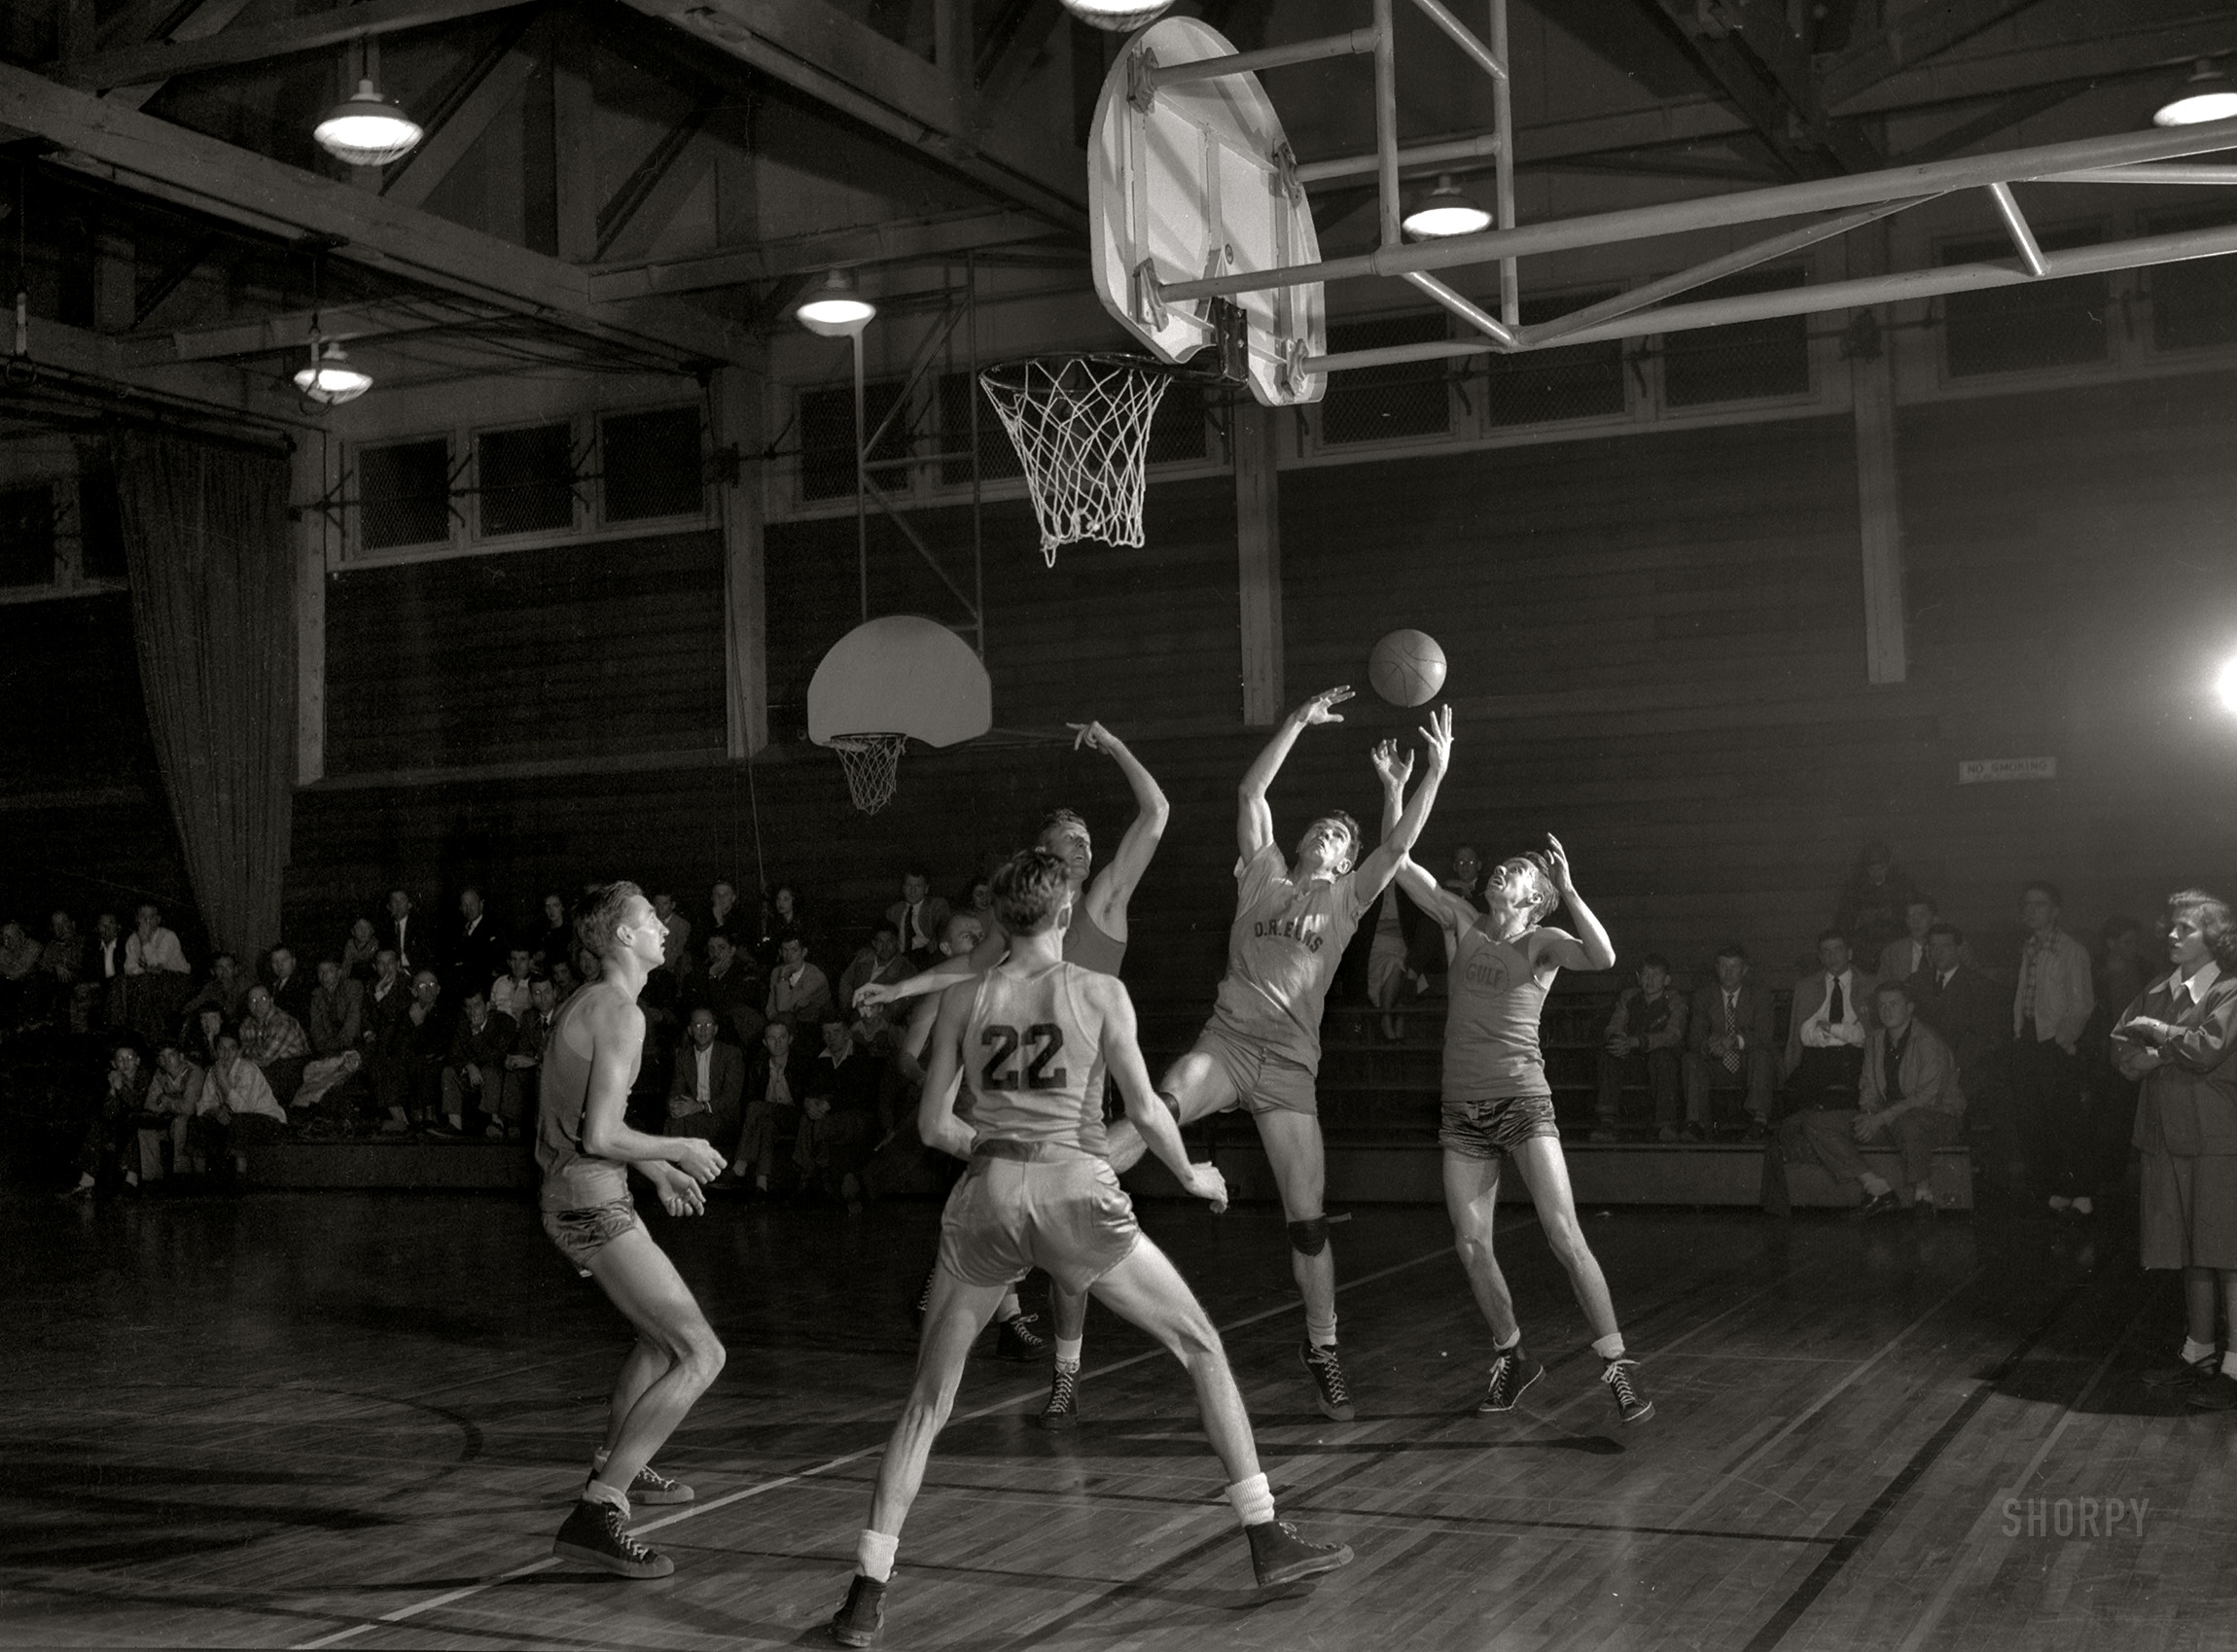 December 28, 1947. Oak Ridge, Tennessee. "Basketball. Elks Club vs. Maryville at Oak Ridge." Acetate negative by Ed Westcott, the Army Corps of Engineers photographer who documented the activities and facilities of the Manhattan Project. View full size.